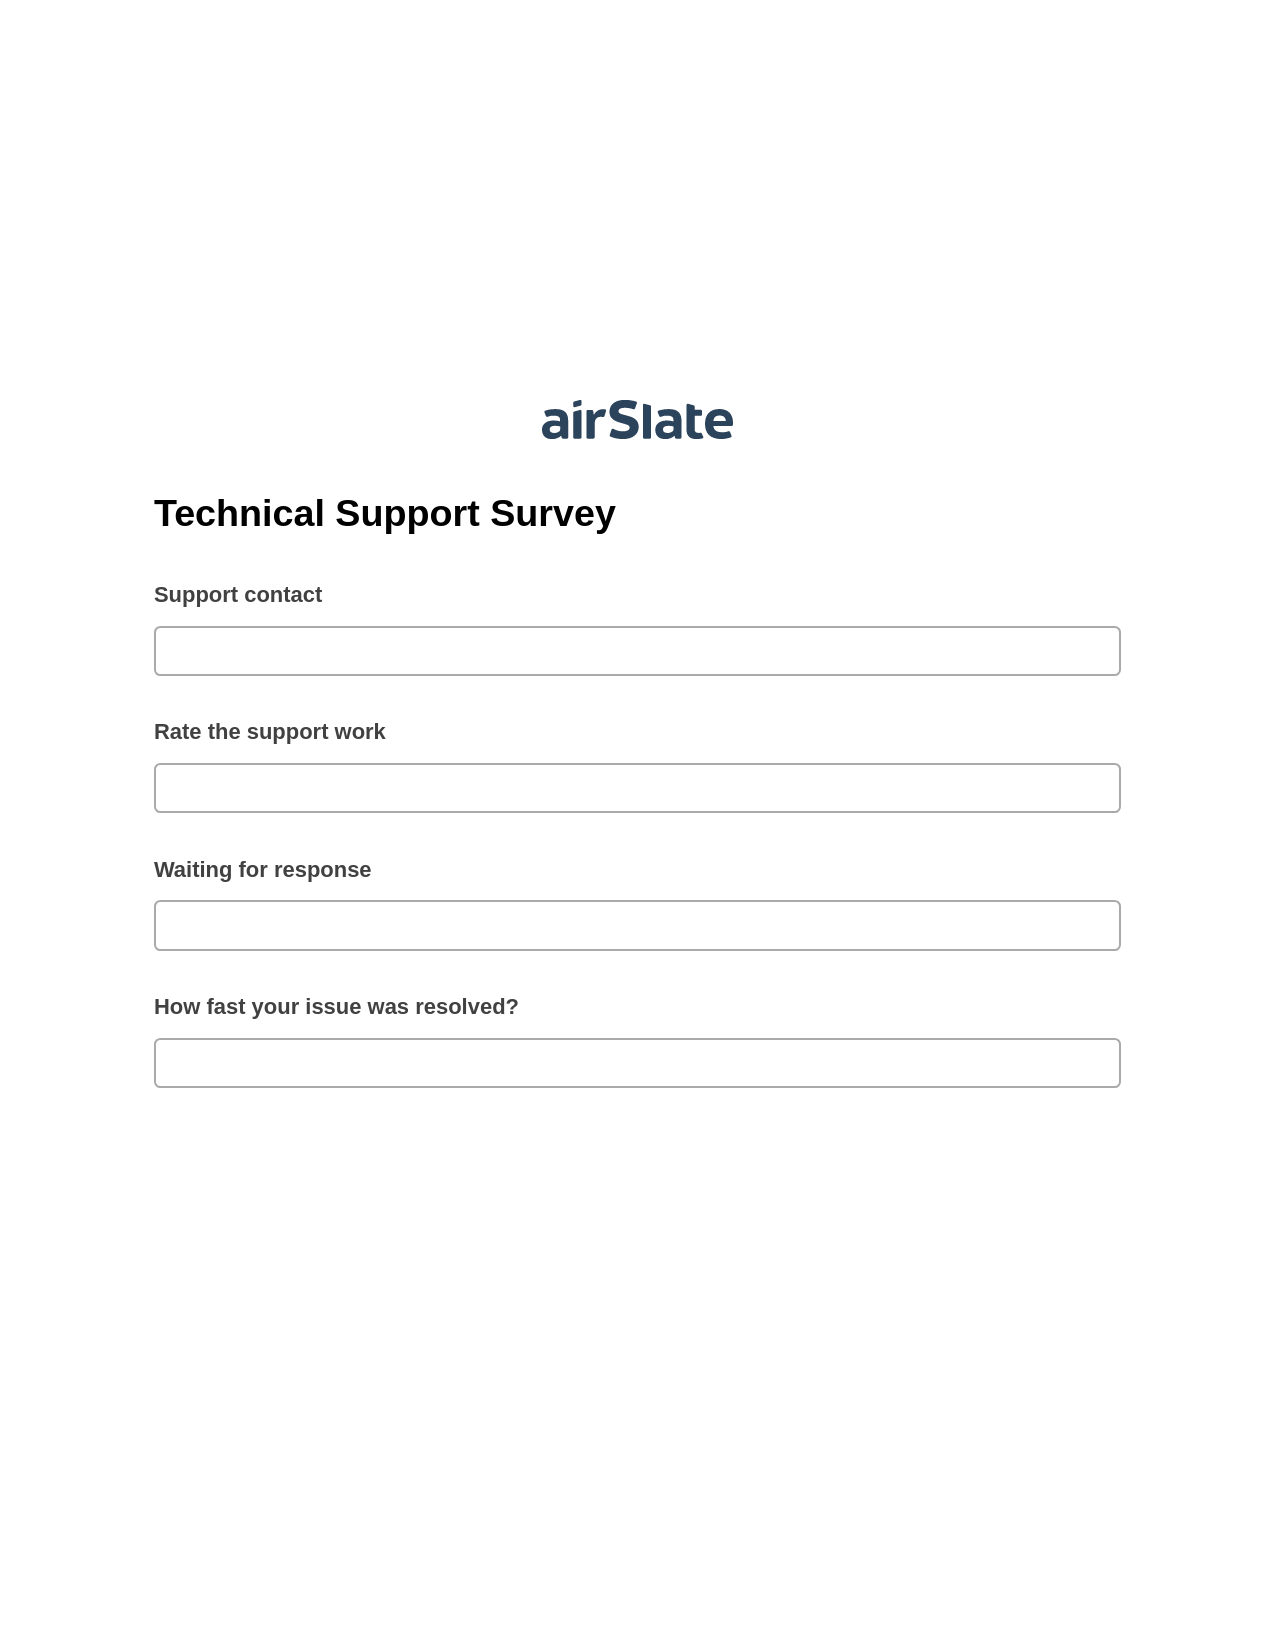 Technical Support Survey Pre-fill from Salesforce Records Bot, Create MS Dynamics 365 Records Bot, Export to Salesforce Record Bot